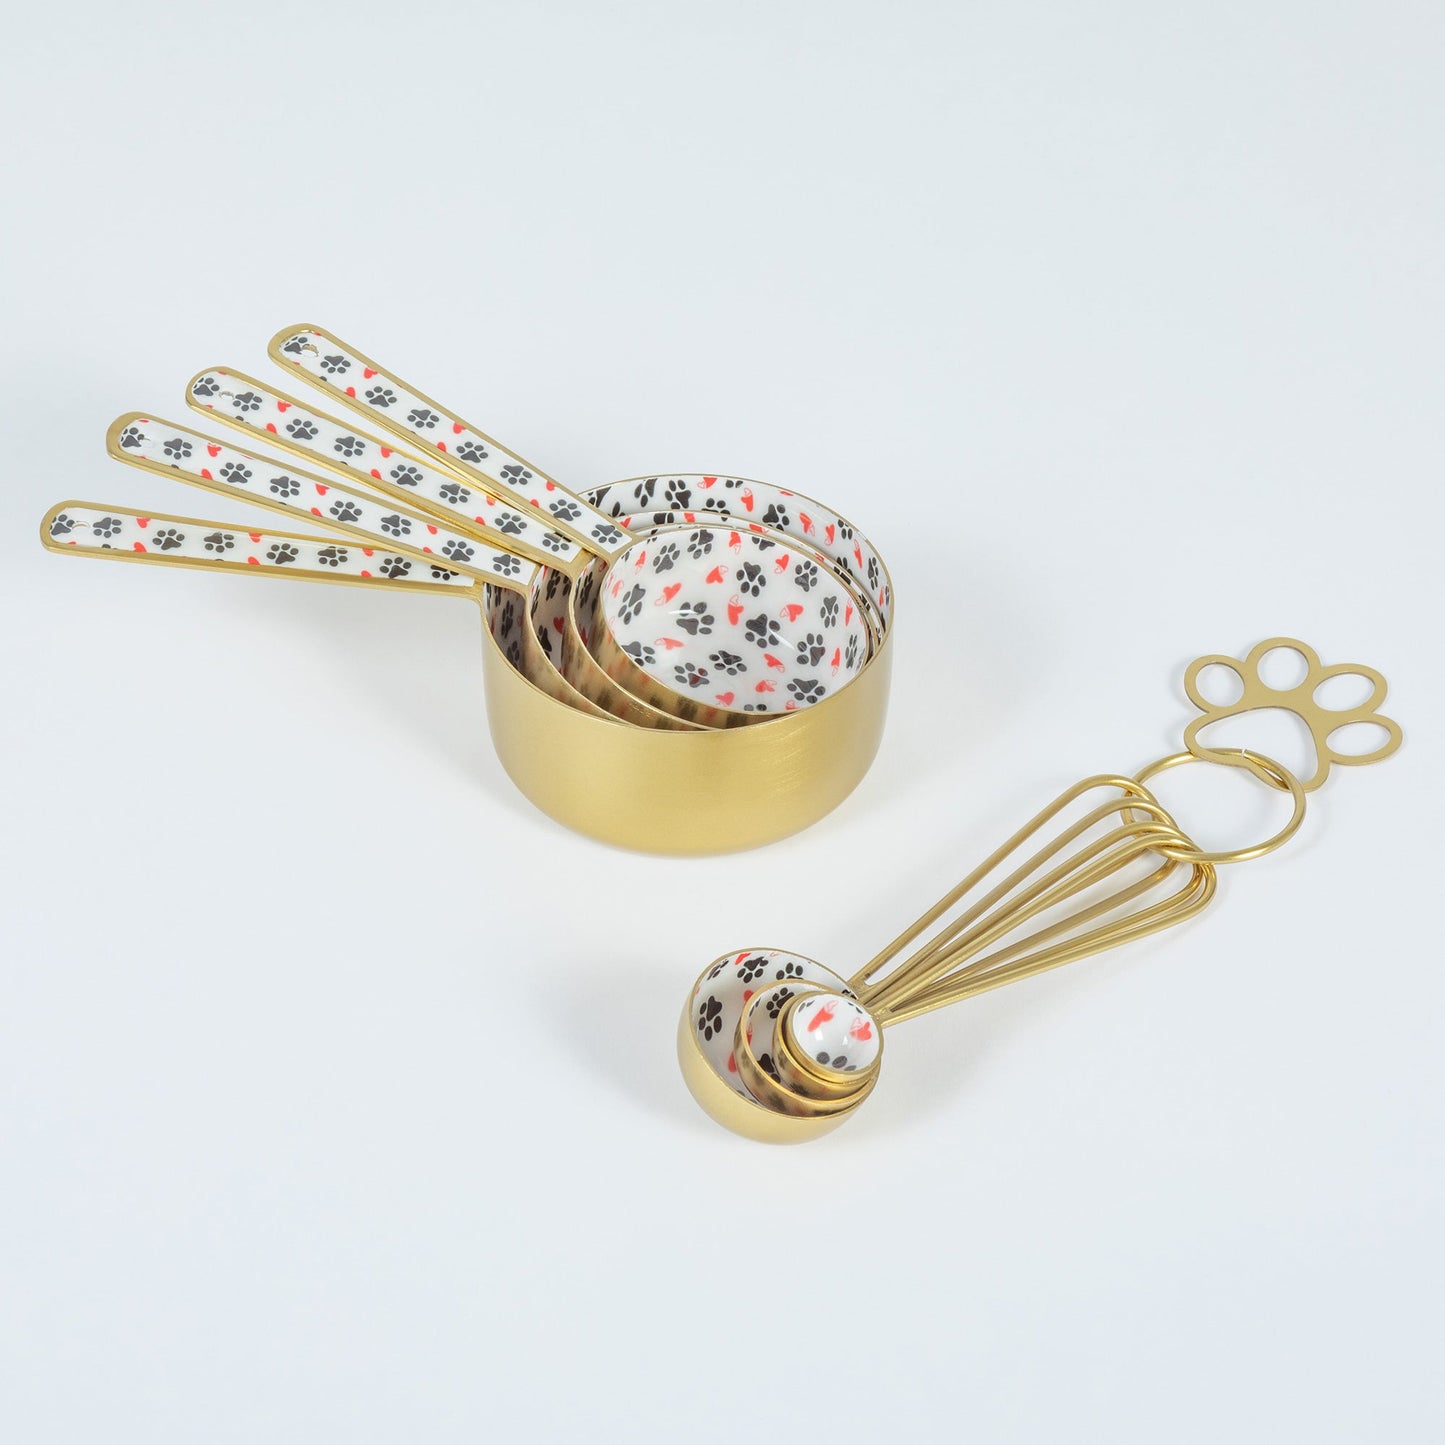 Pawfectly Patterned Measuring Tools